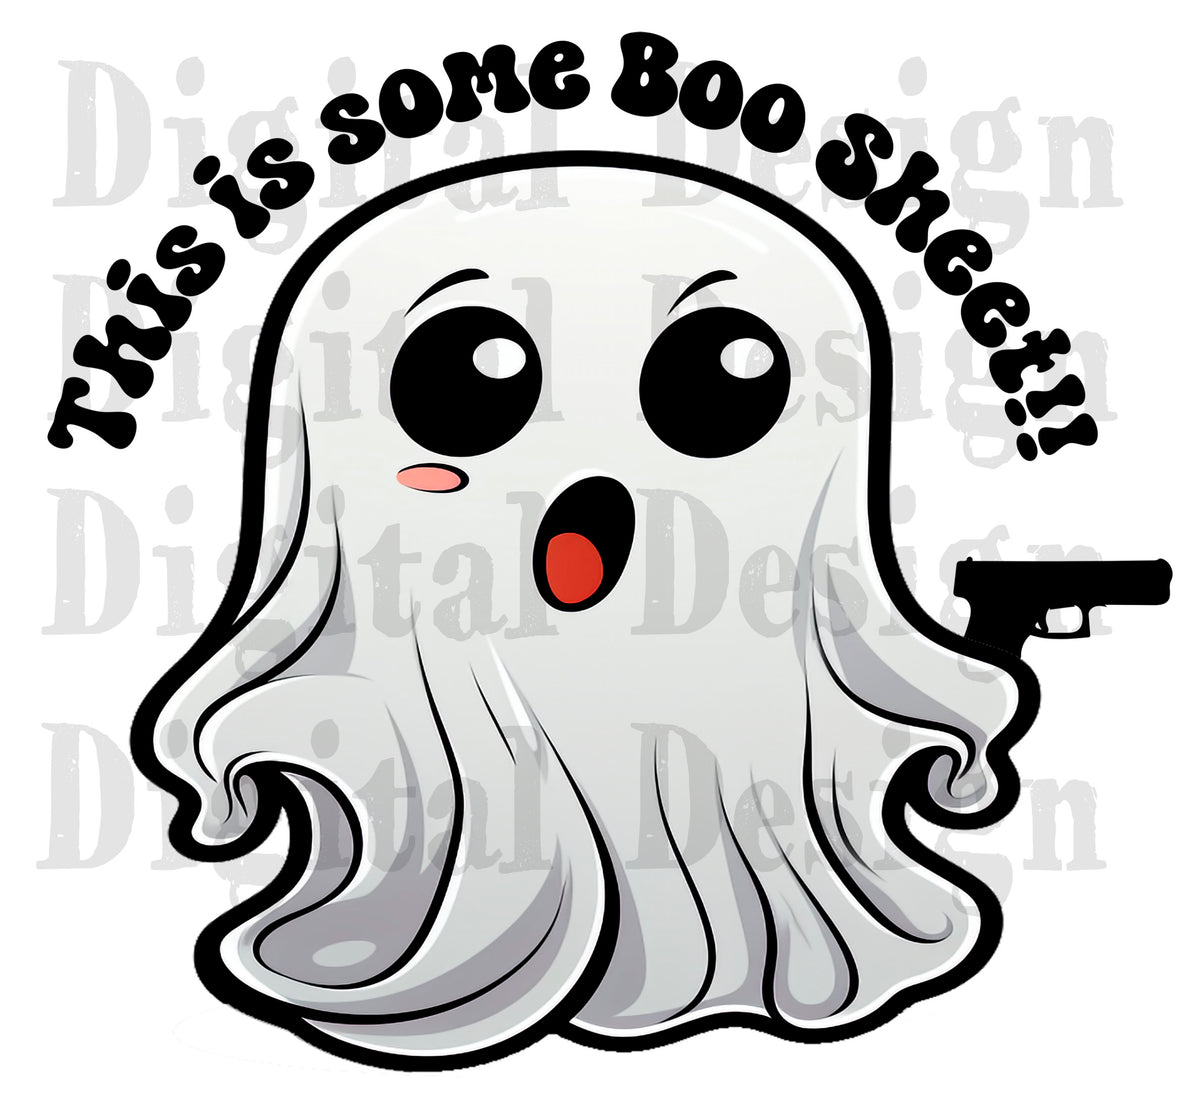 This Is Some Boo Sheet PNG, Funny Halloween Png, Halloween Ghost, Spooky Vibes PNG, Halloween Shirt Png, Halloween Sublimation Design